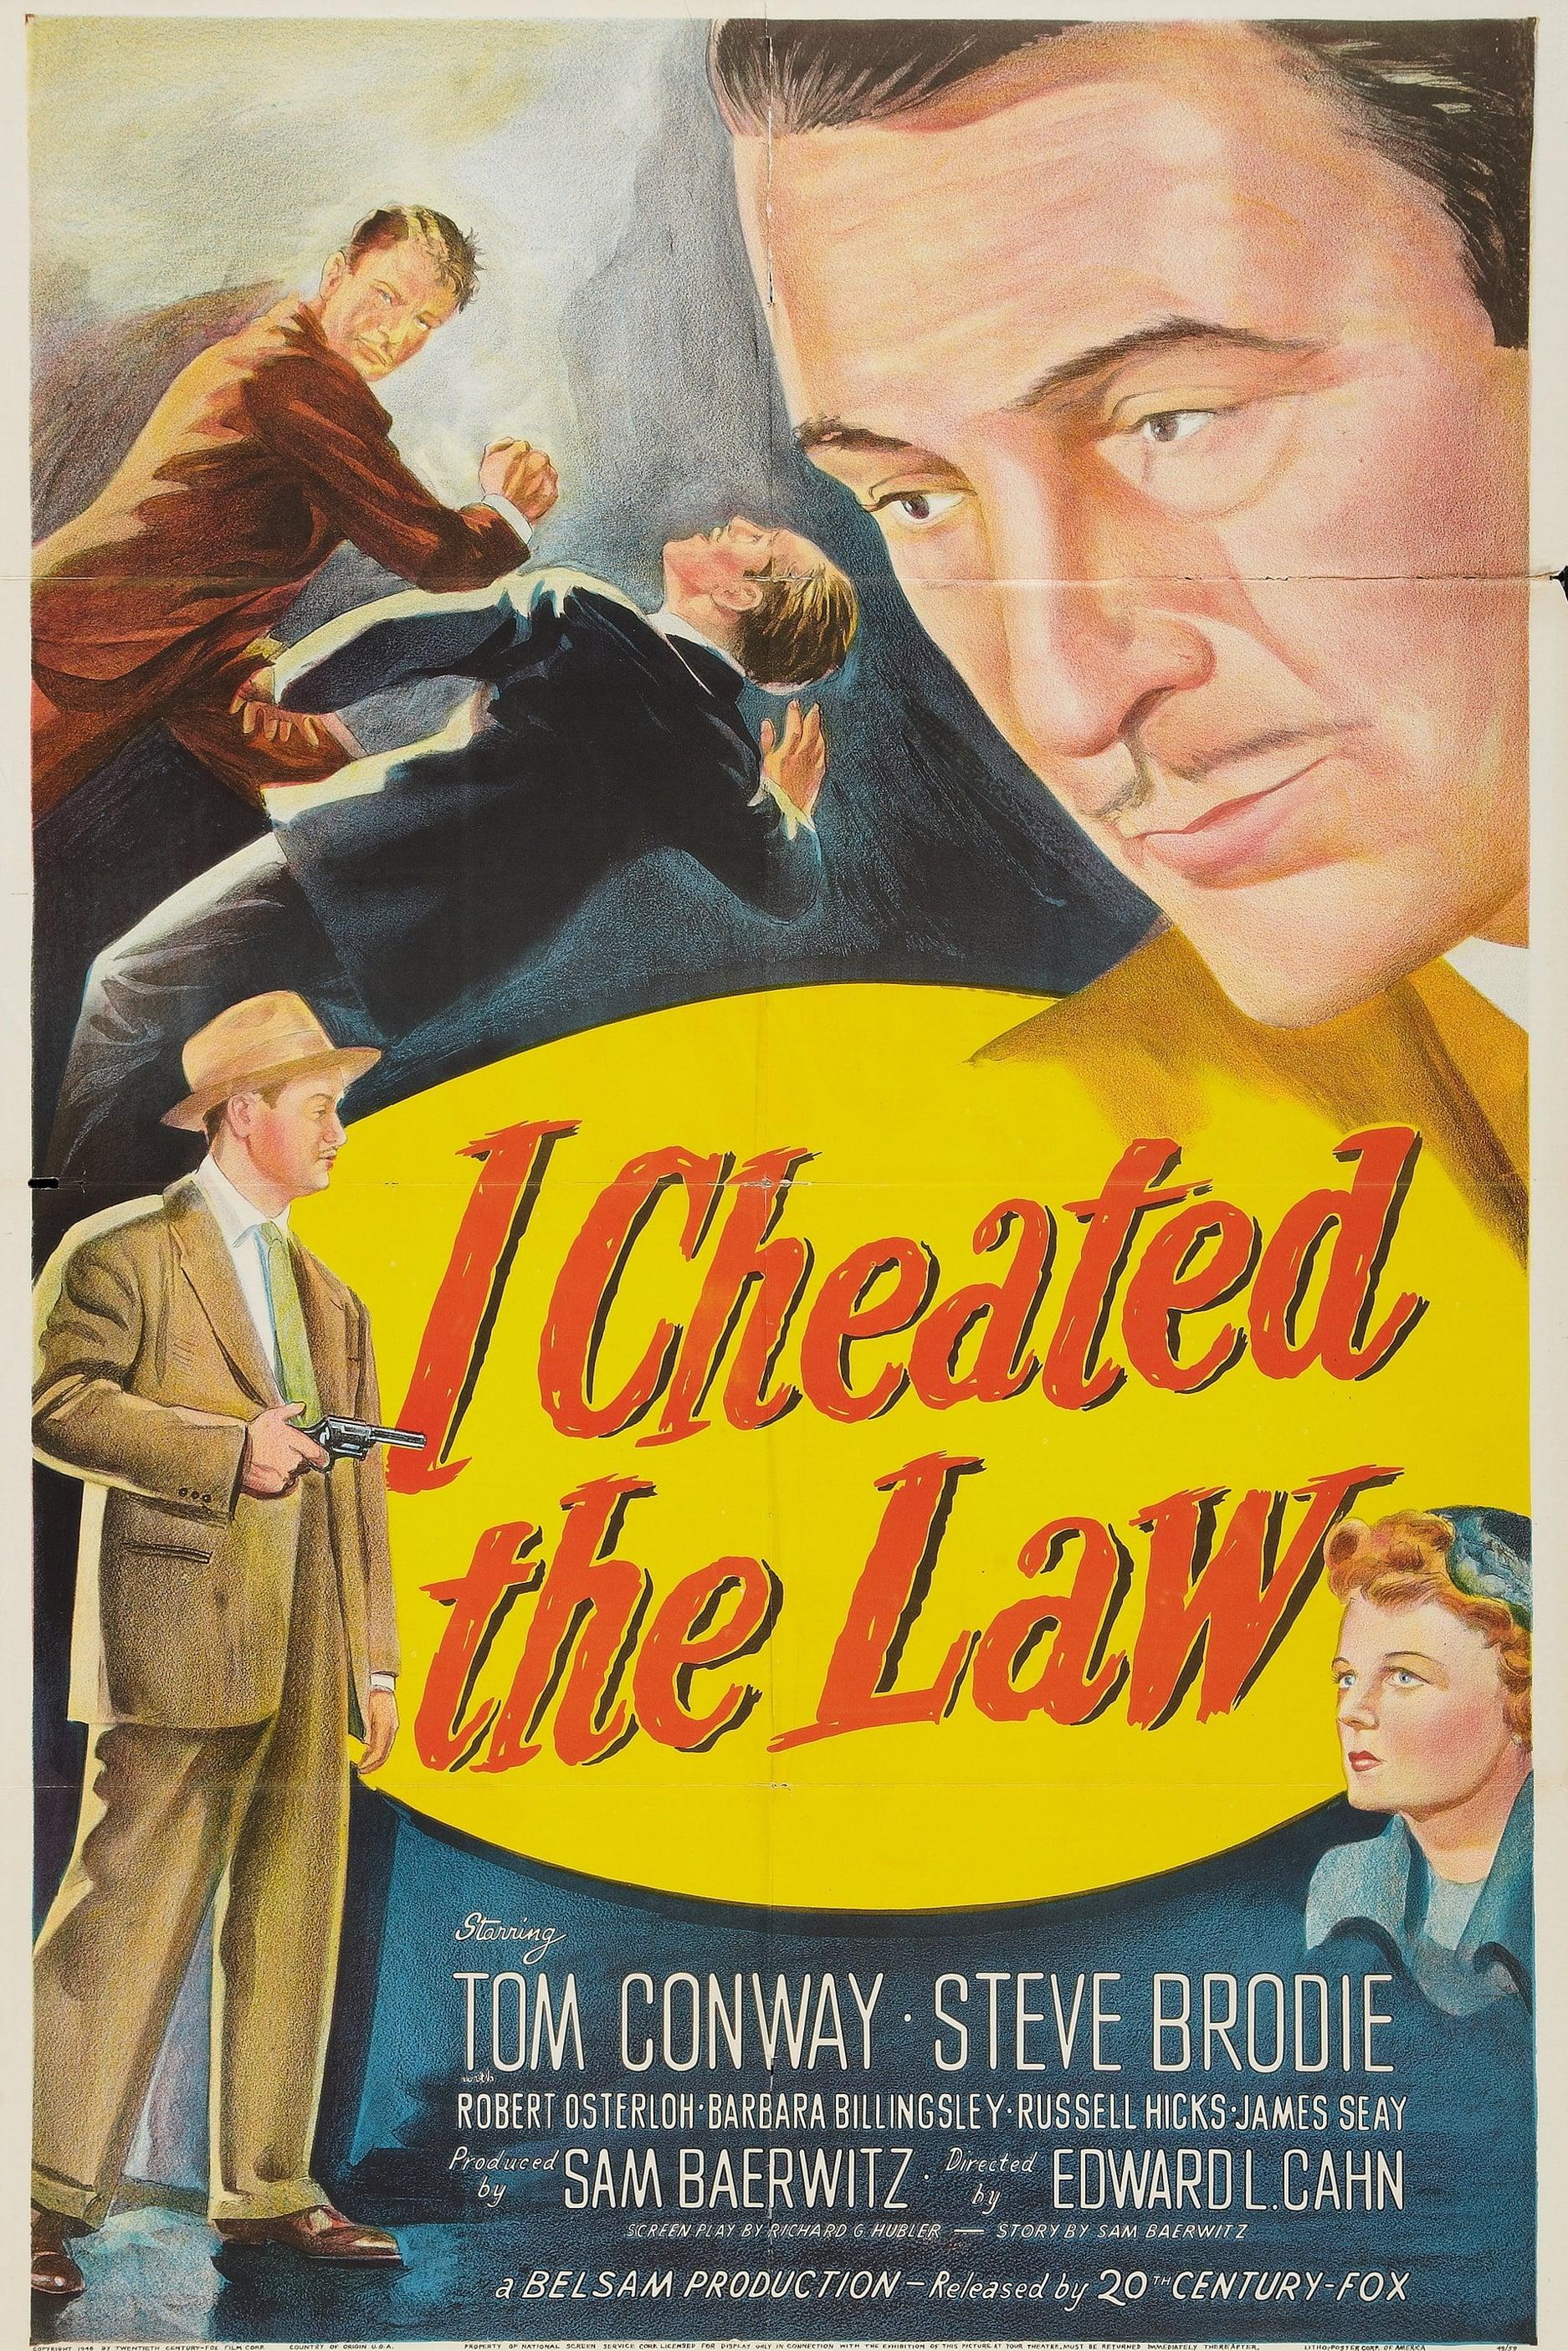 I Cheated the Law poster